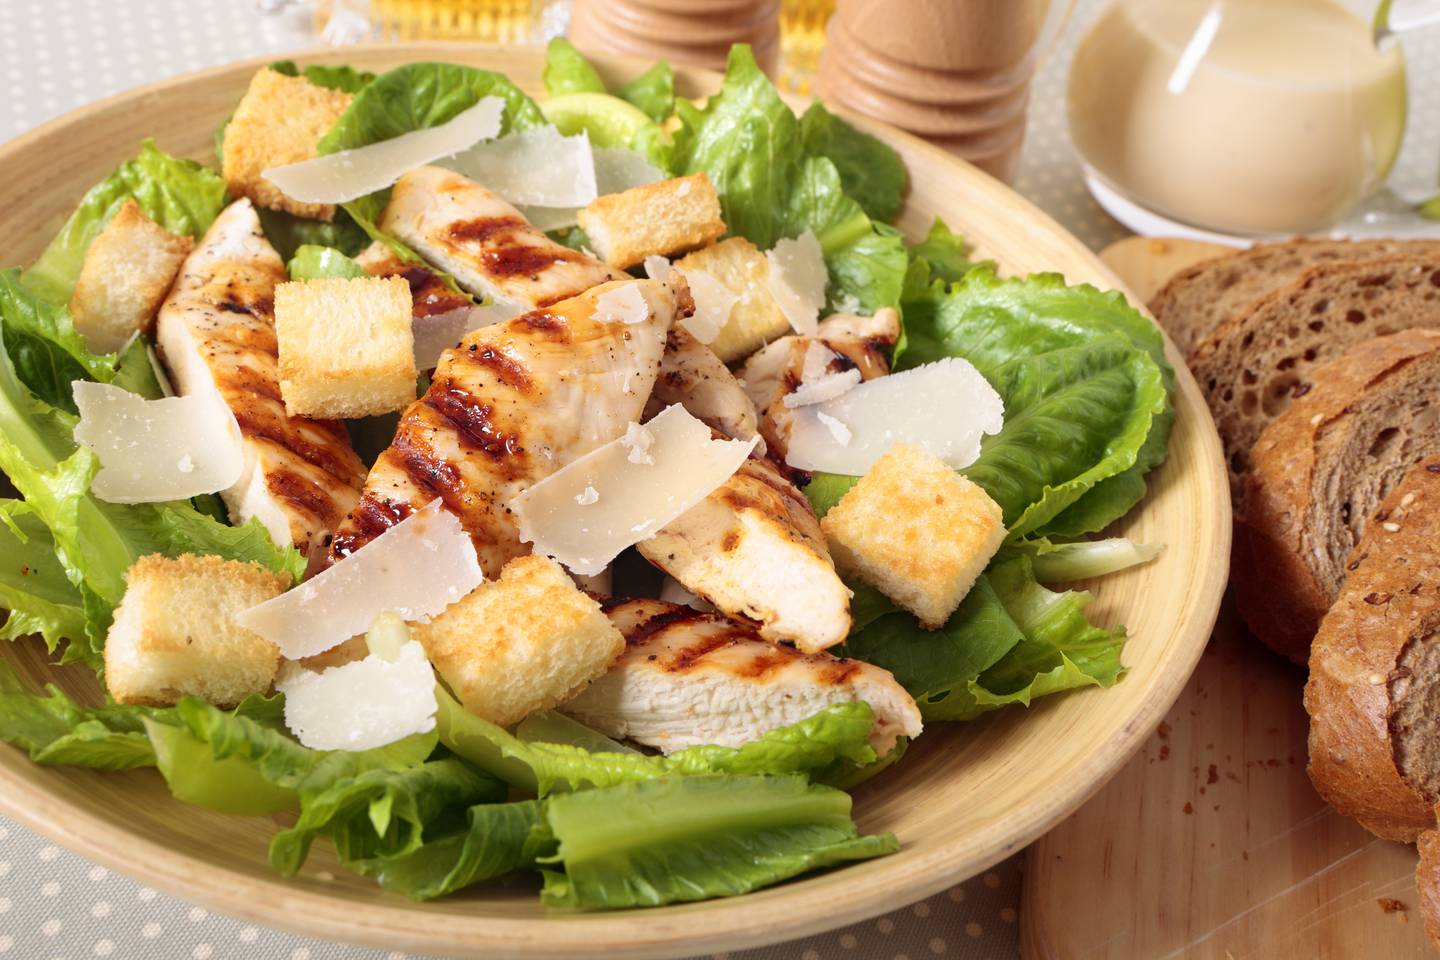 Caesar salad with griddled chicken and lettuce